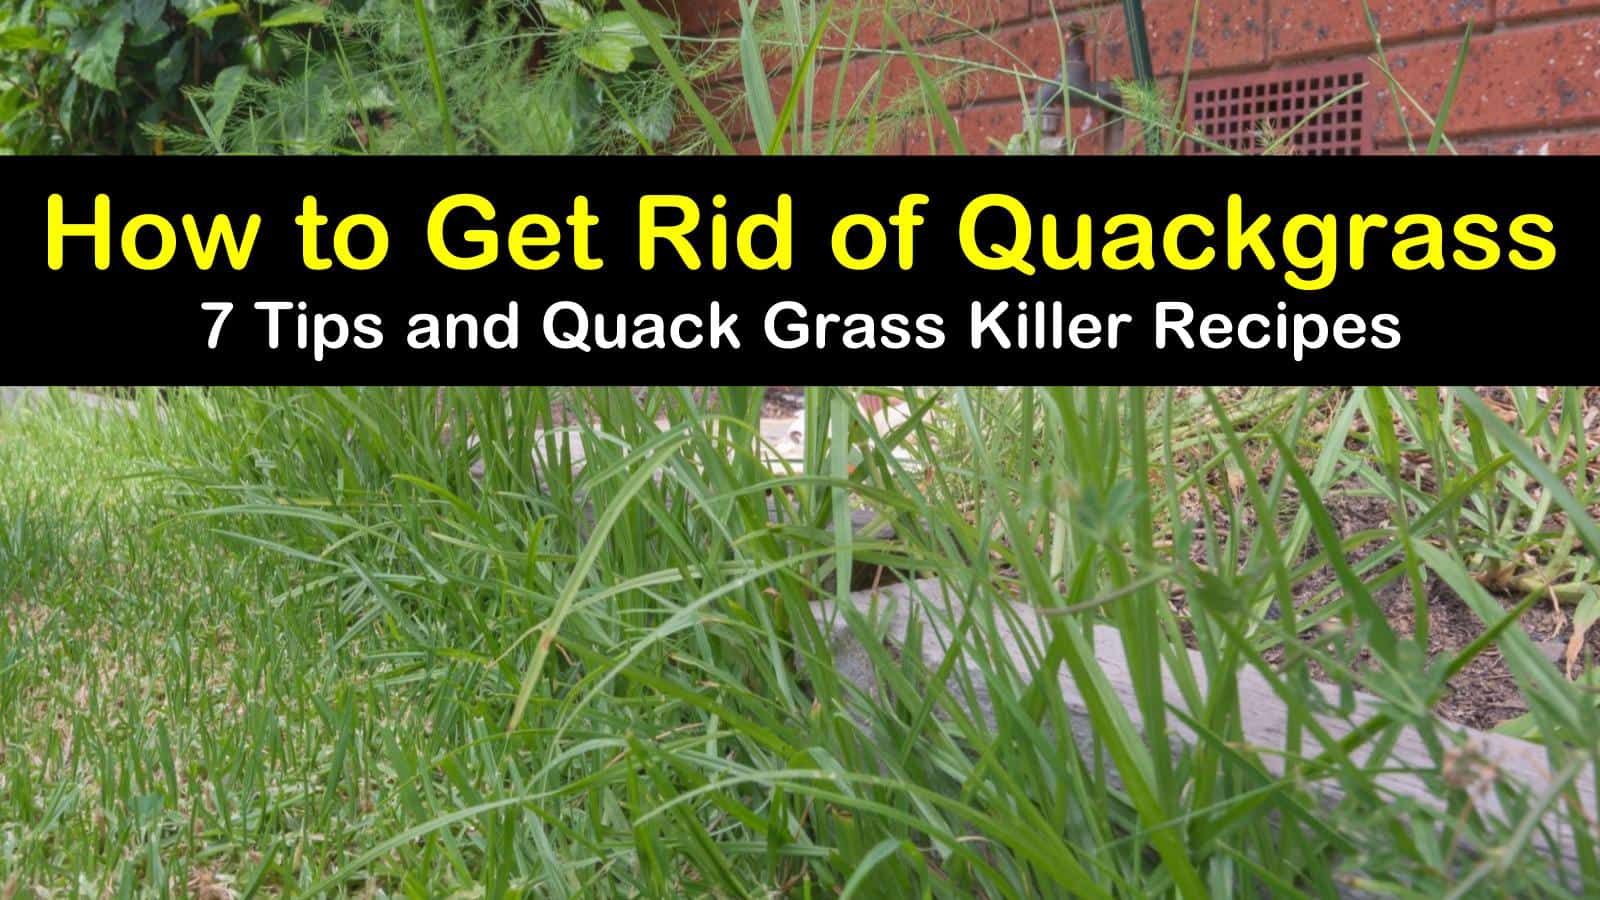 7 Easy Ways to Get Rid of Quackgrass